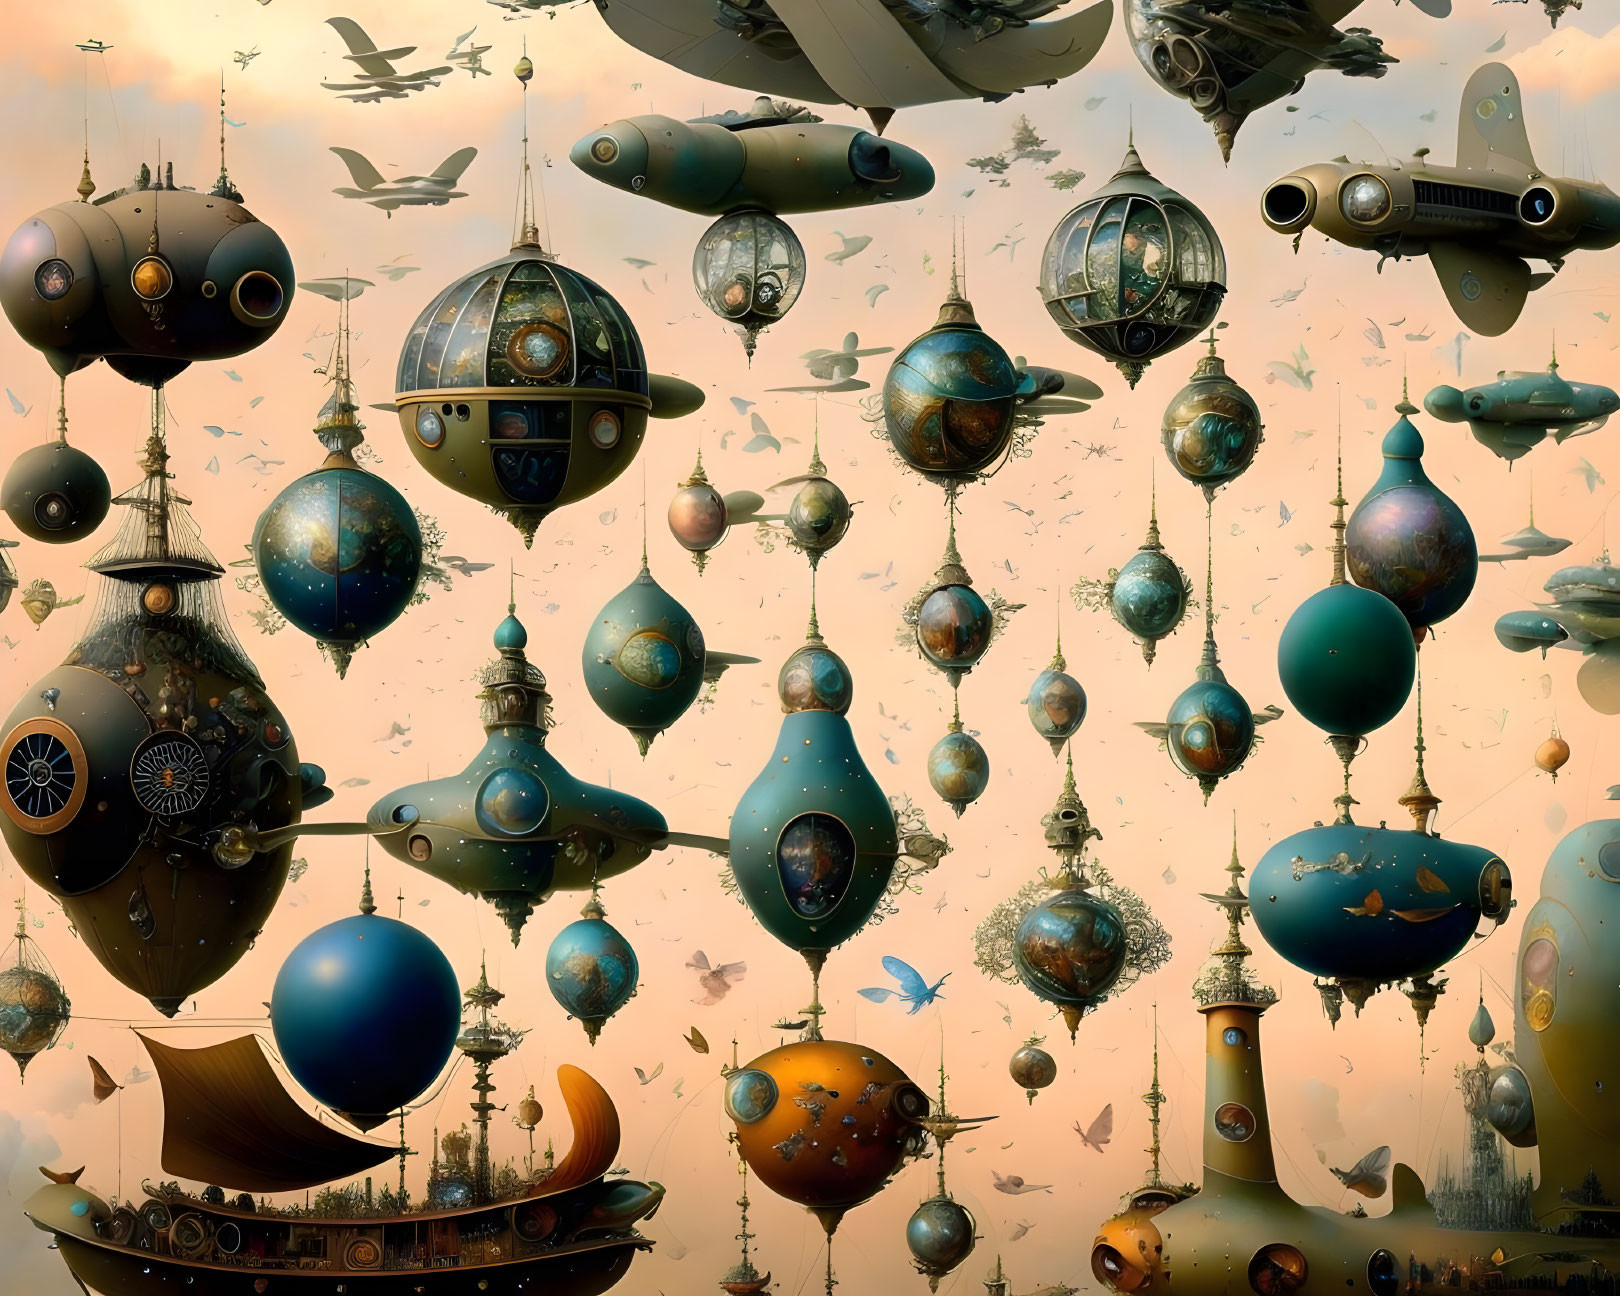 Fantastical sky with steampunk-inspired flying machines and structures.